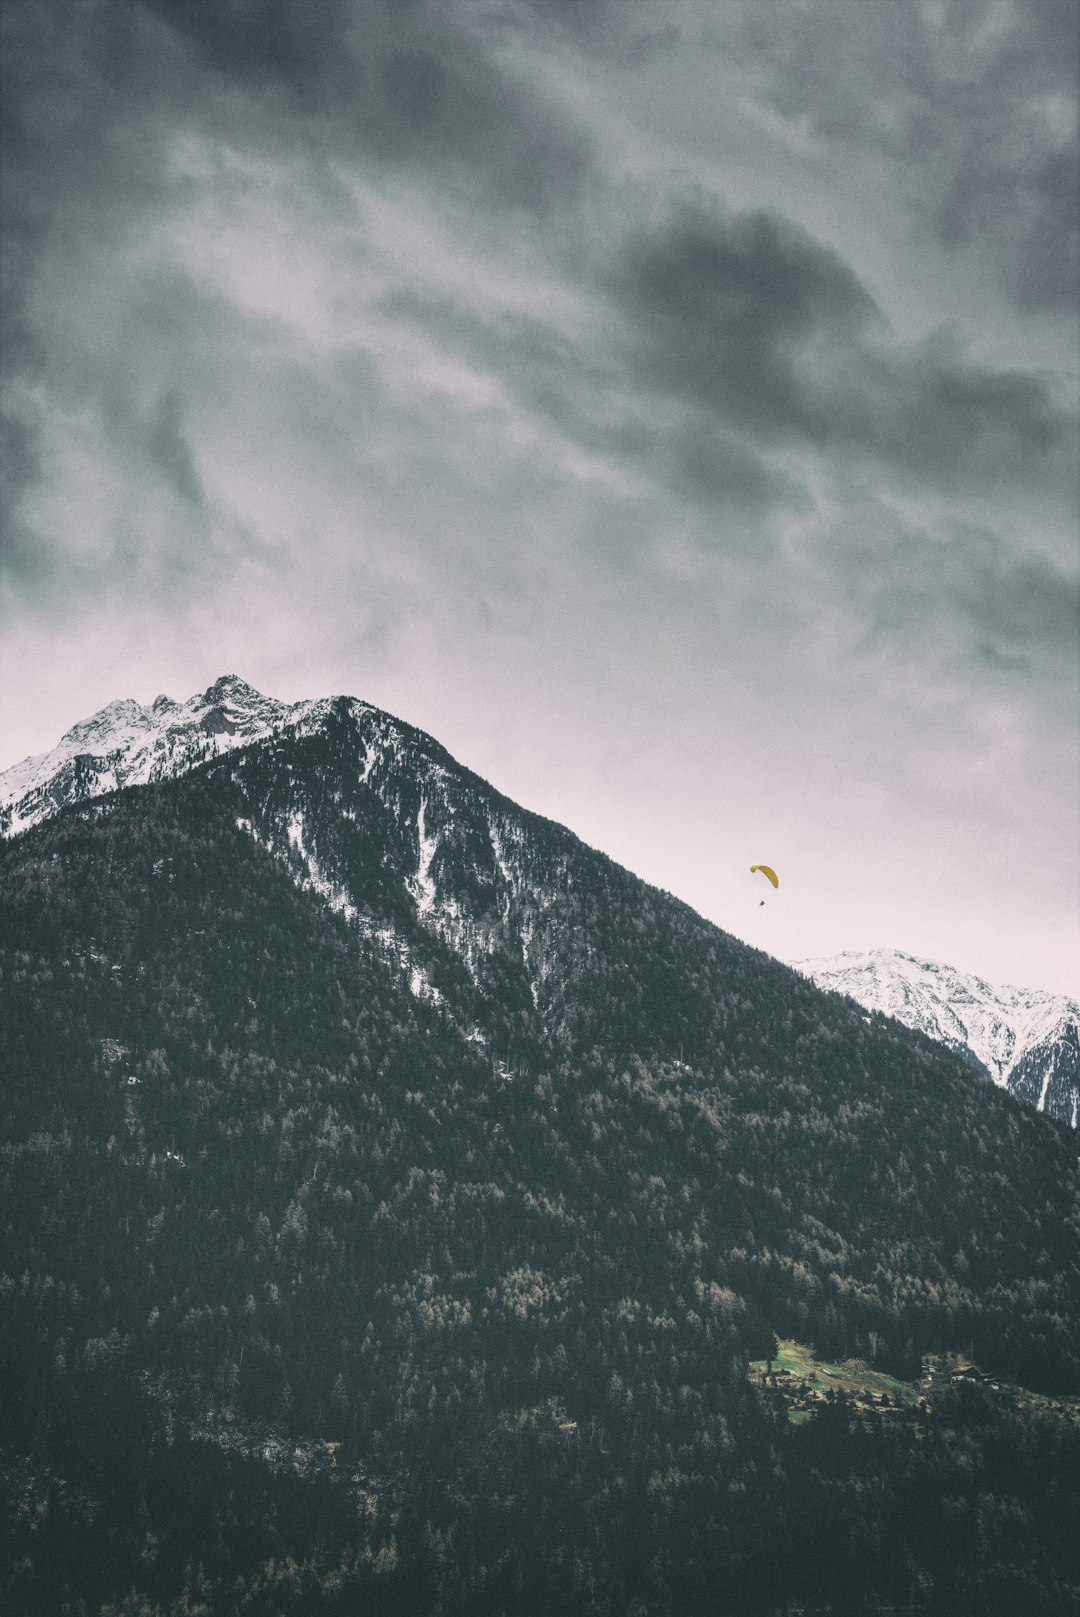 The paraglider